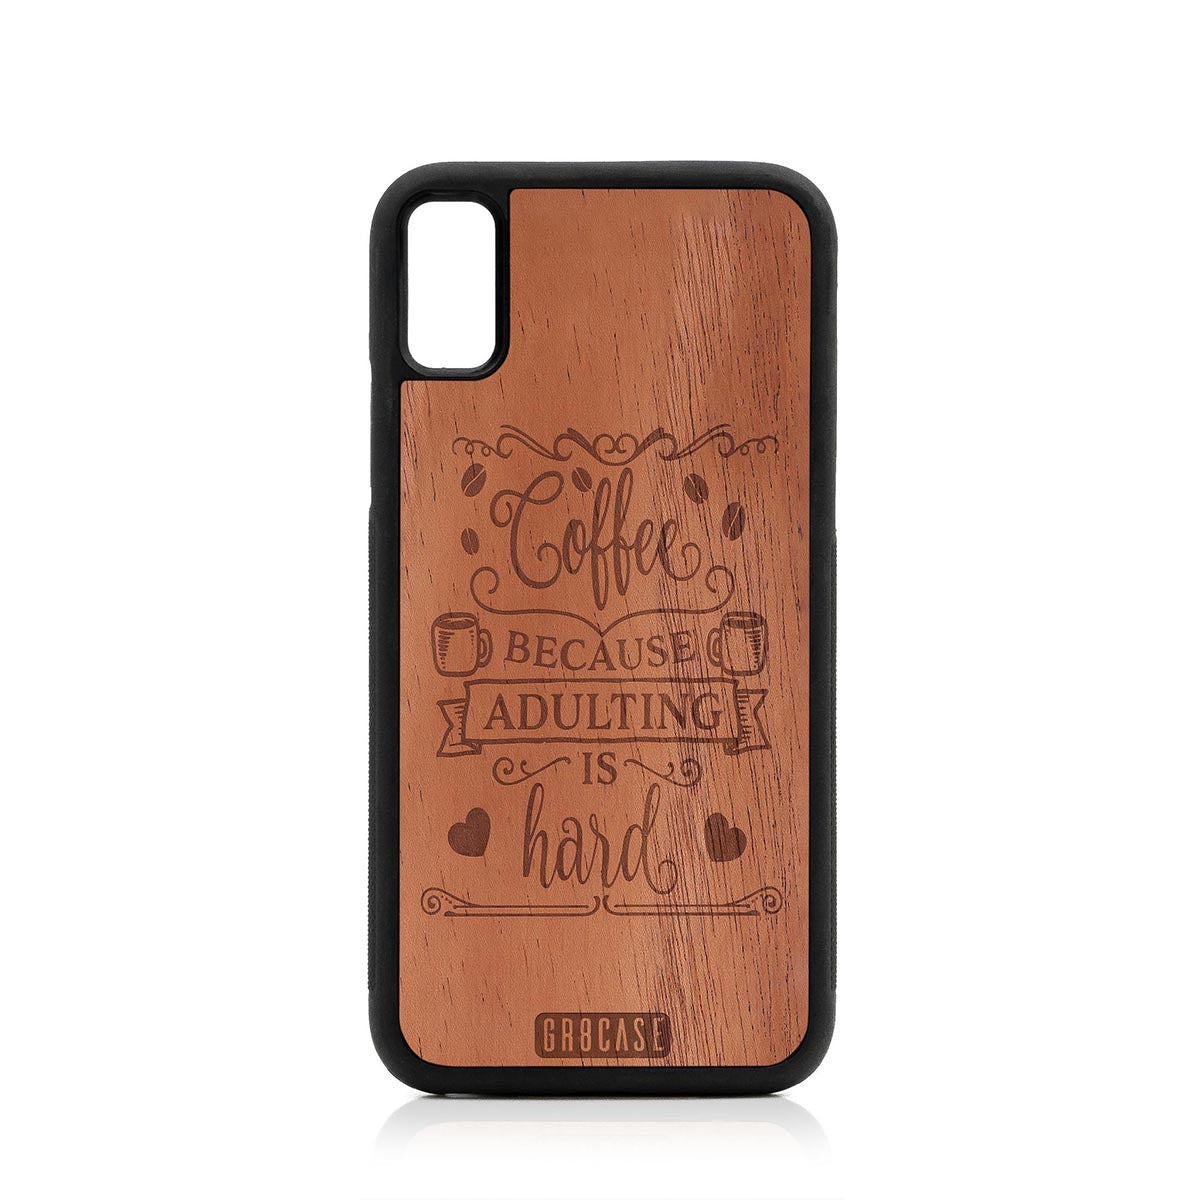 Coffee Because Adulting Is Hard Design Wood Case For iPhone X/XS by GR8CASE